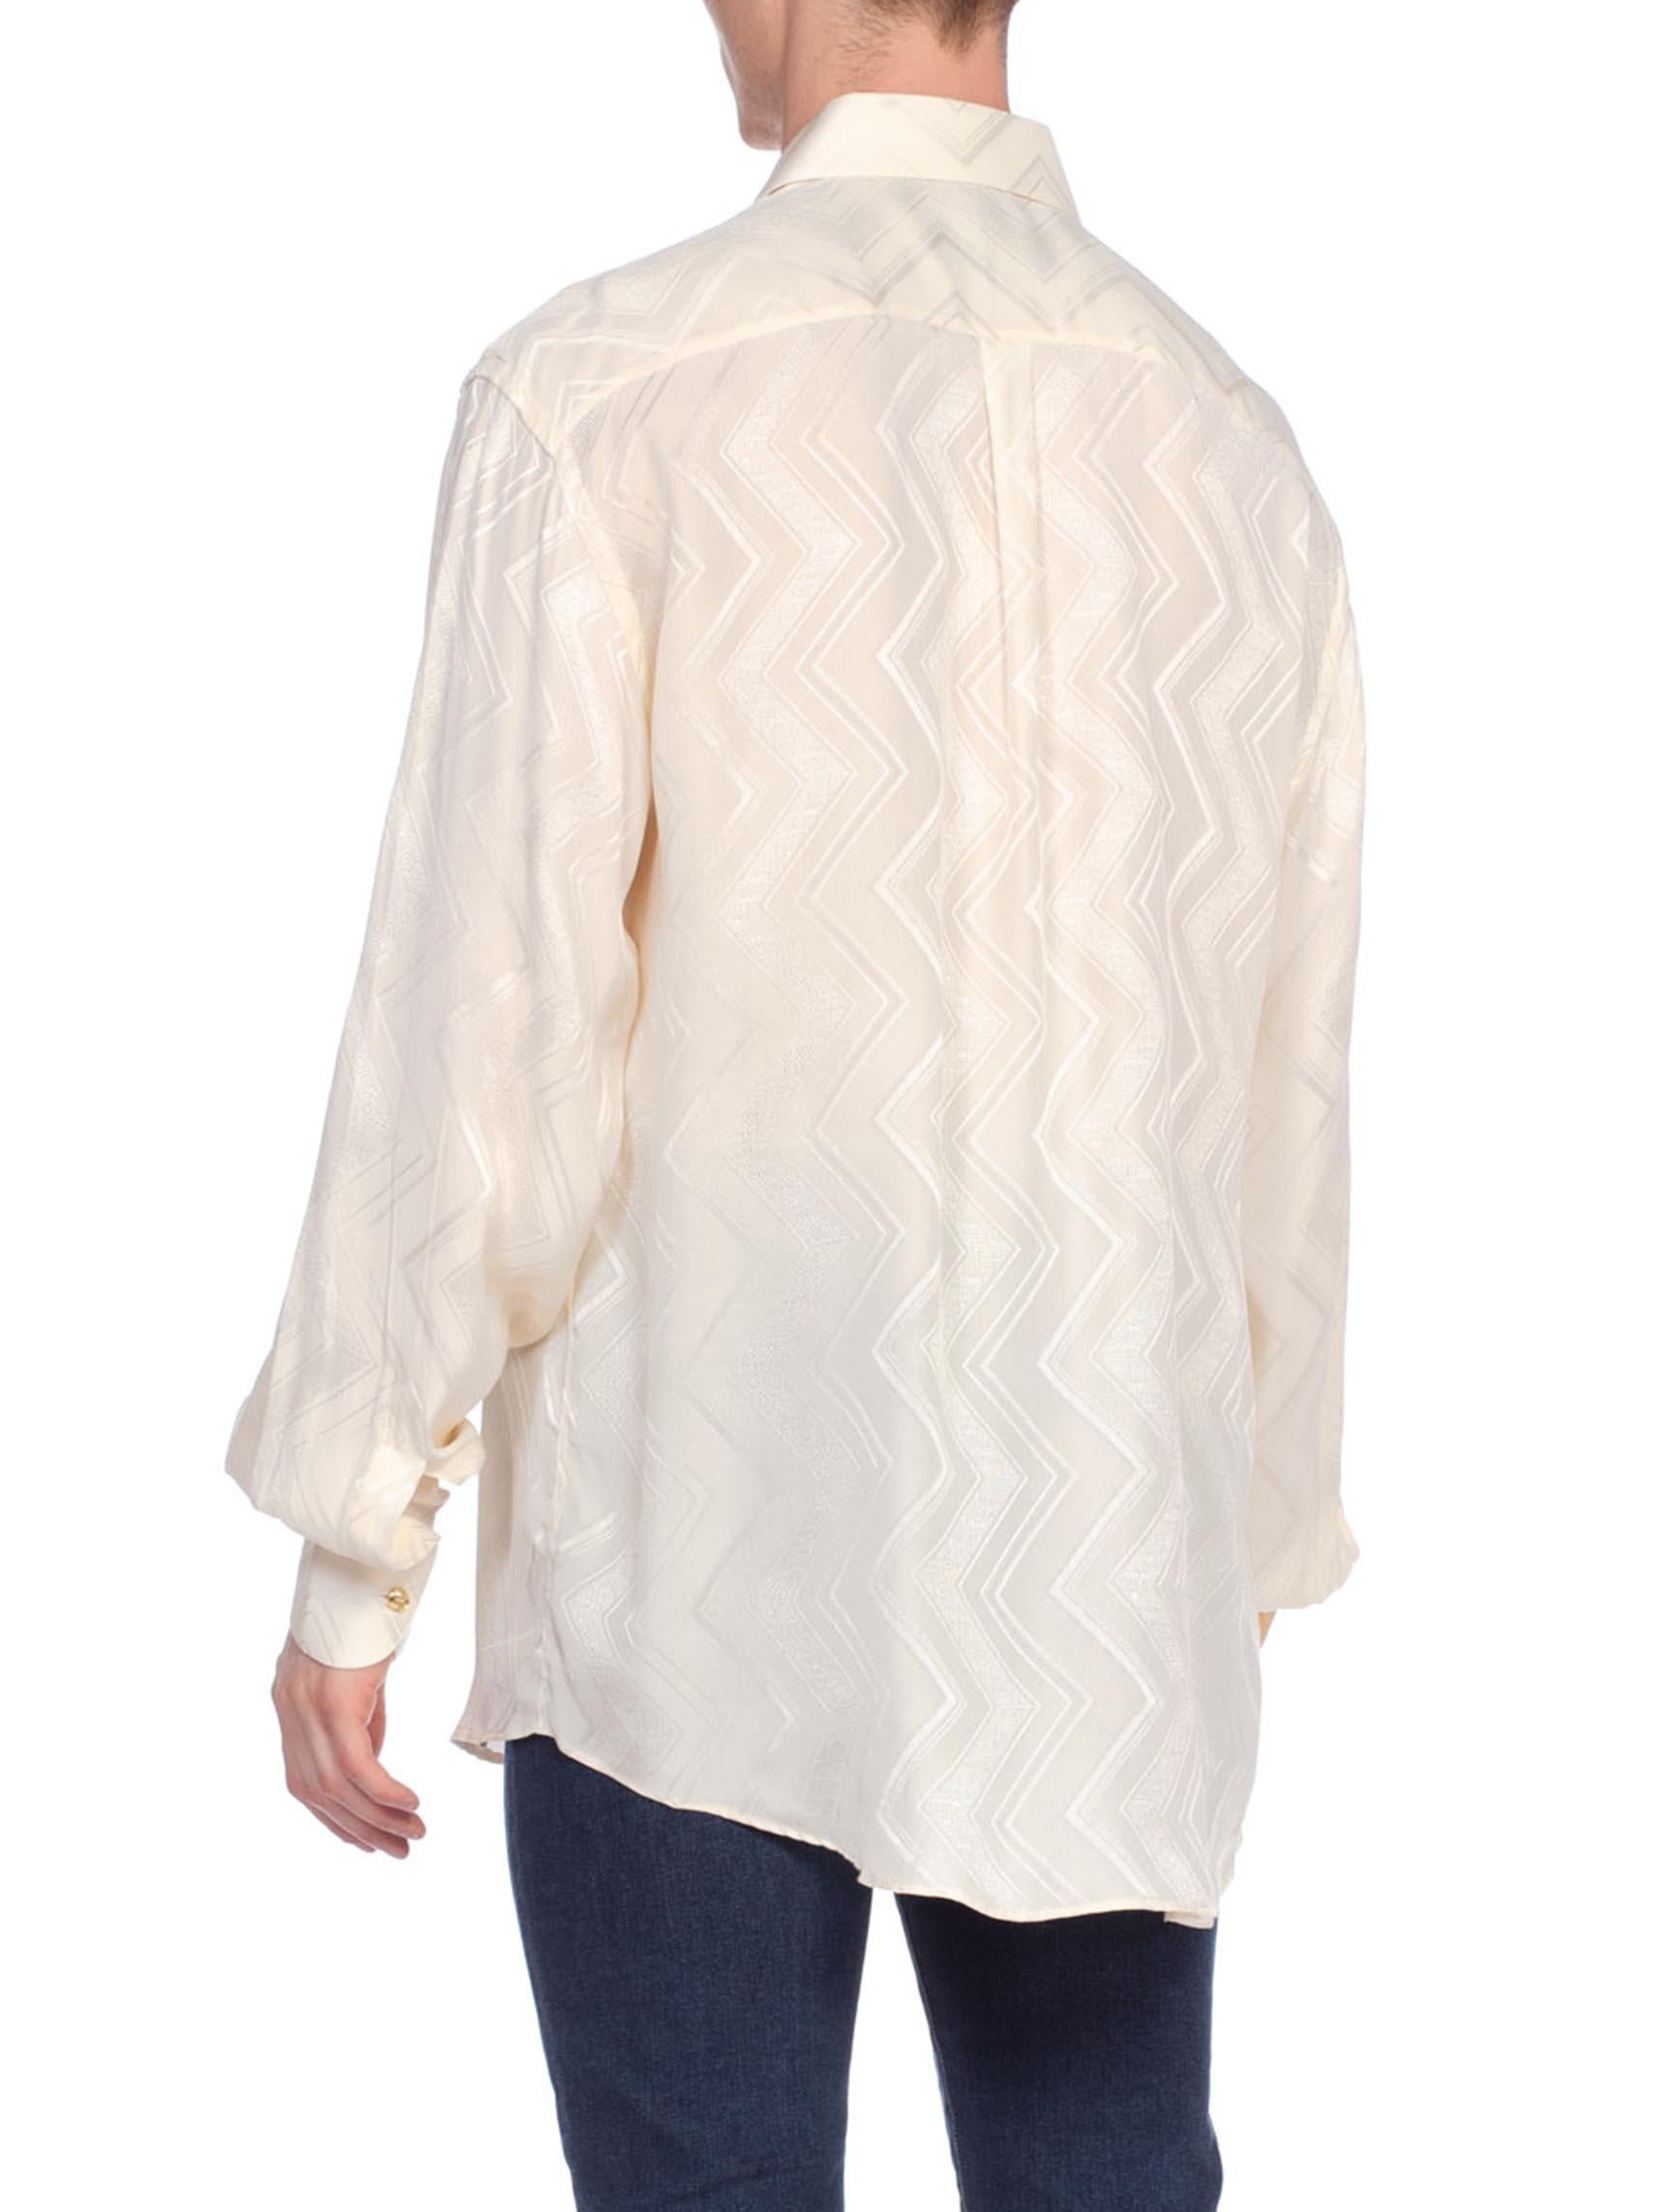 1970'S Cream Silk Jacquard Men's Disco Shirt From Beverly Hills, Made In Italy 4